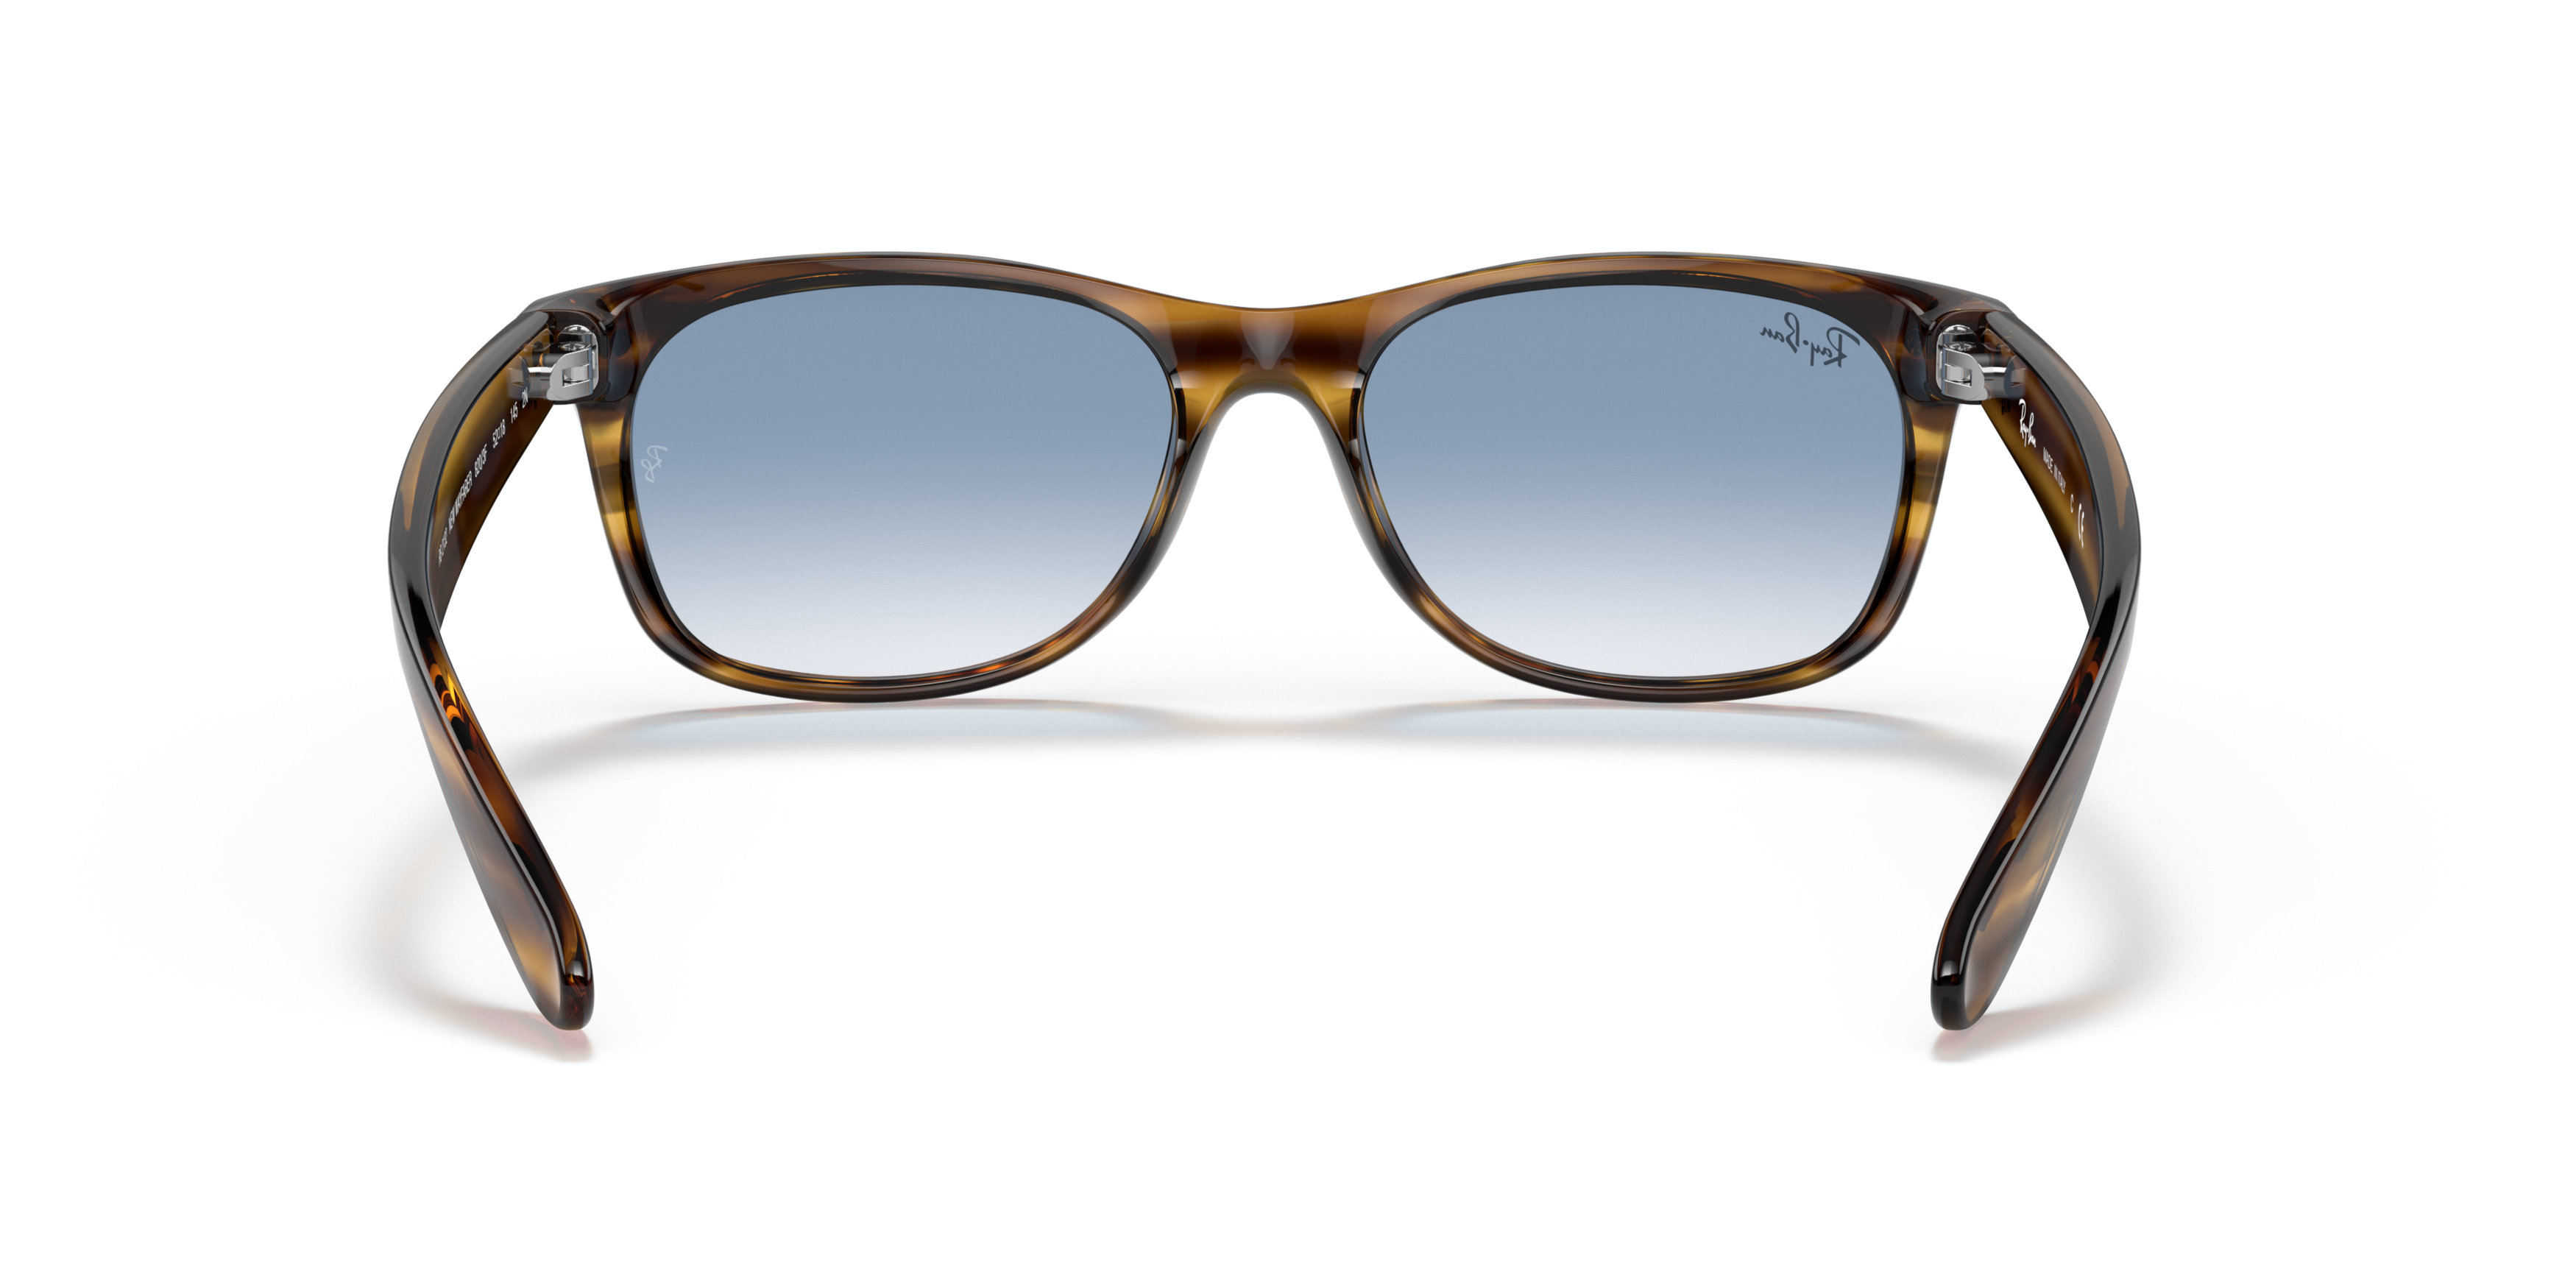 [products.image.detail02] Ray-Ban New Wayfarer RB2132 820/3F